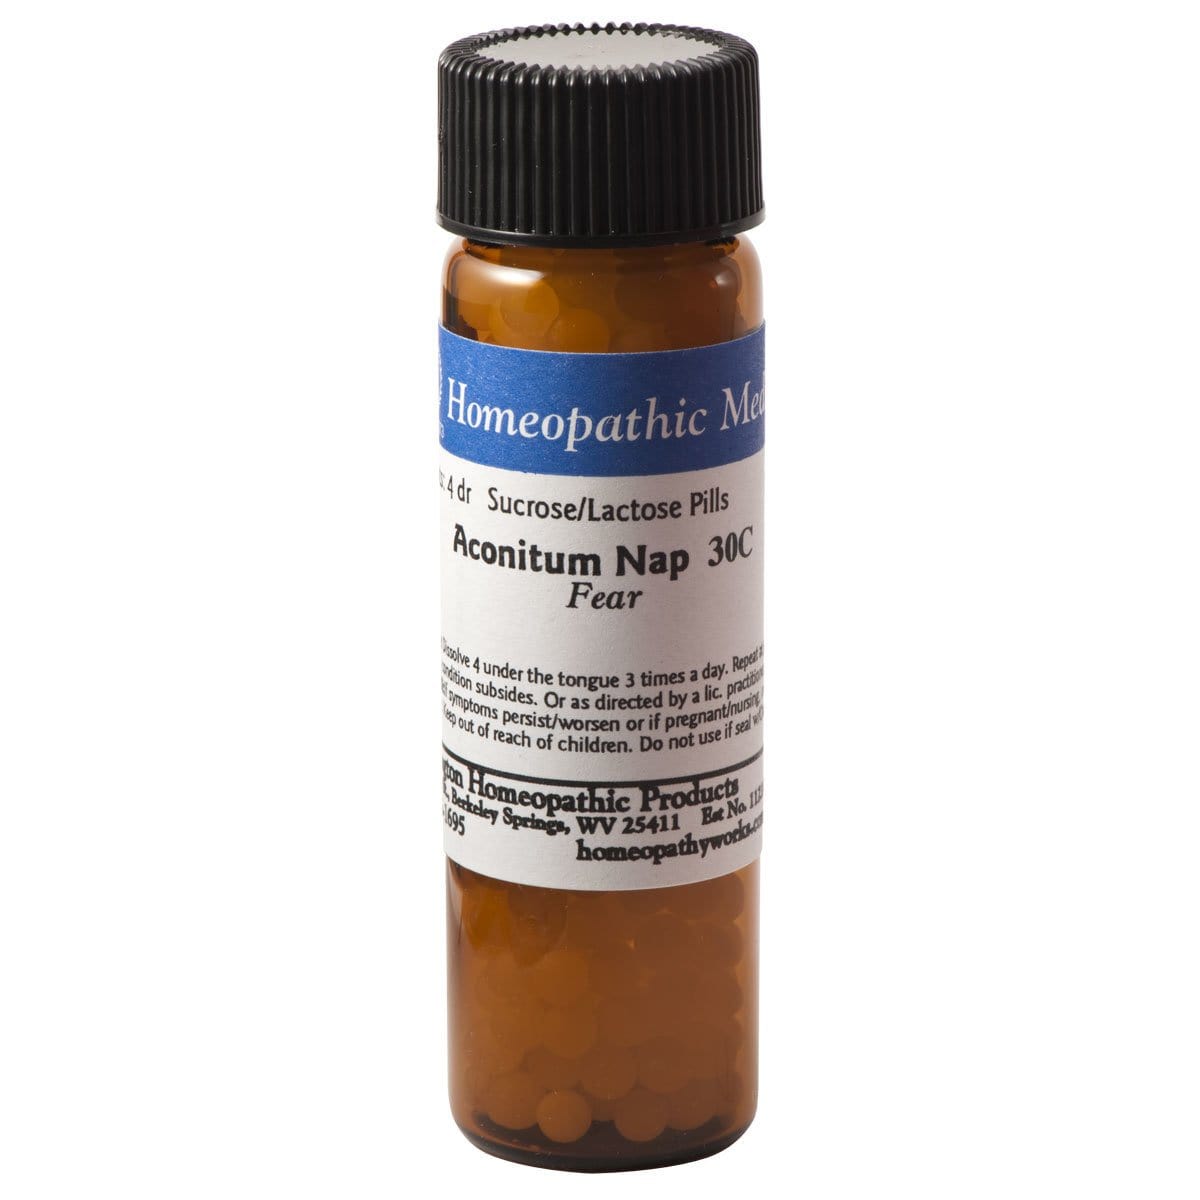 Aconite, aconitum napellus homeopathic remedy for Fear, Chills, Colds, Cough, Eye pain, Dizziness.